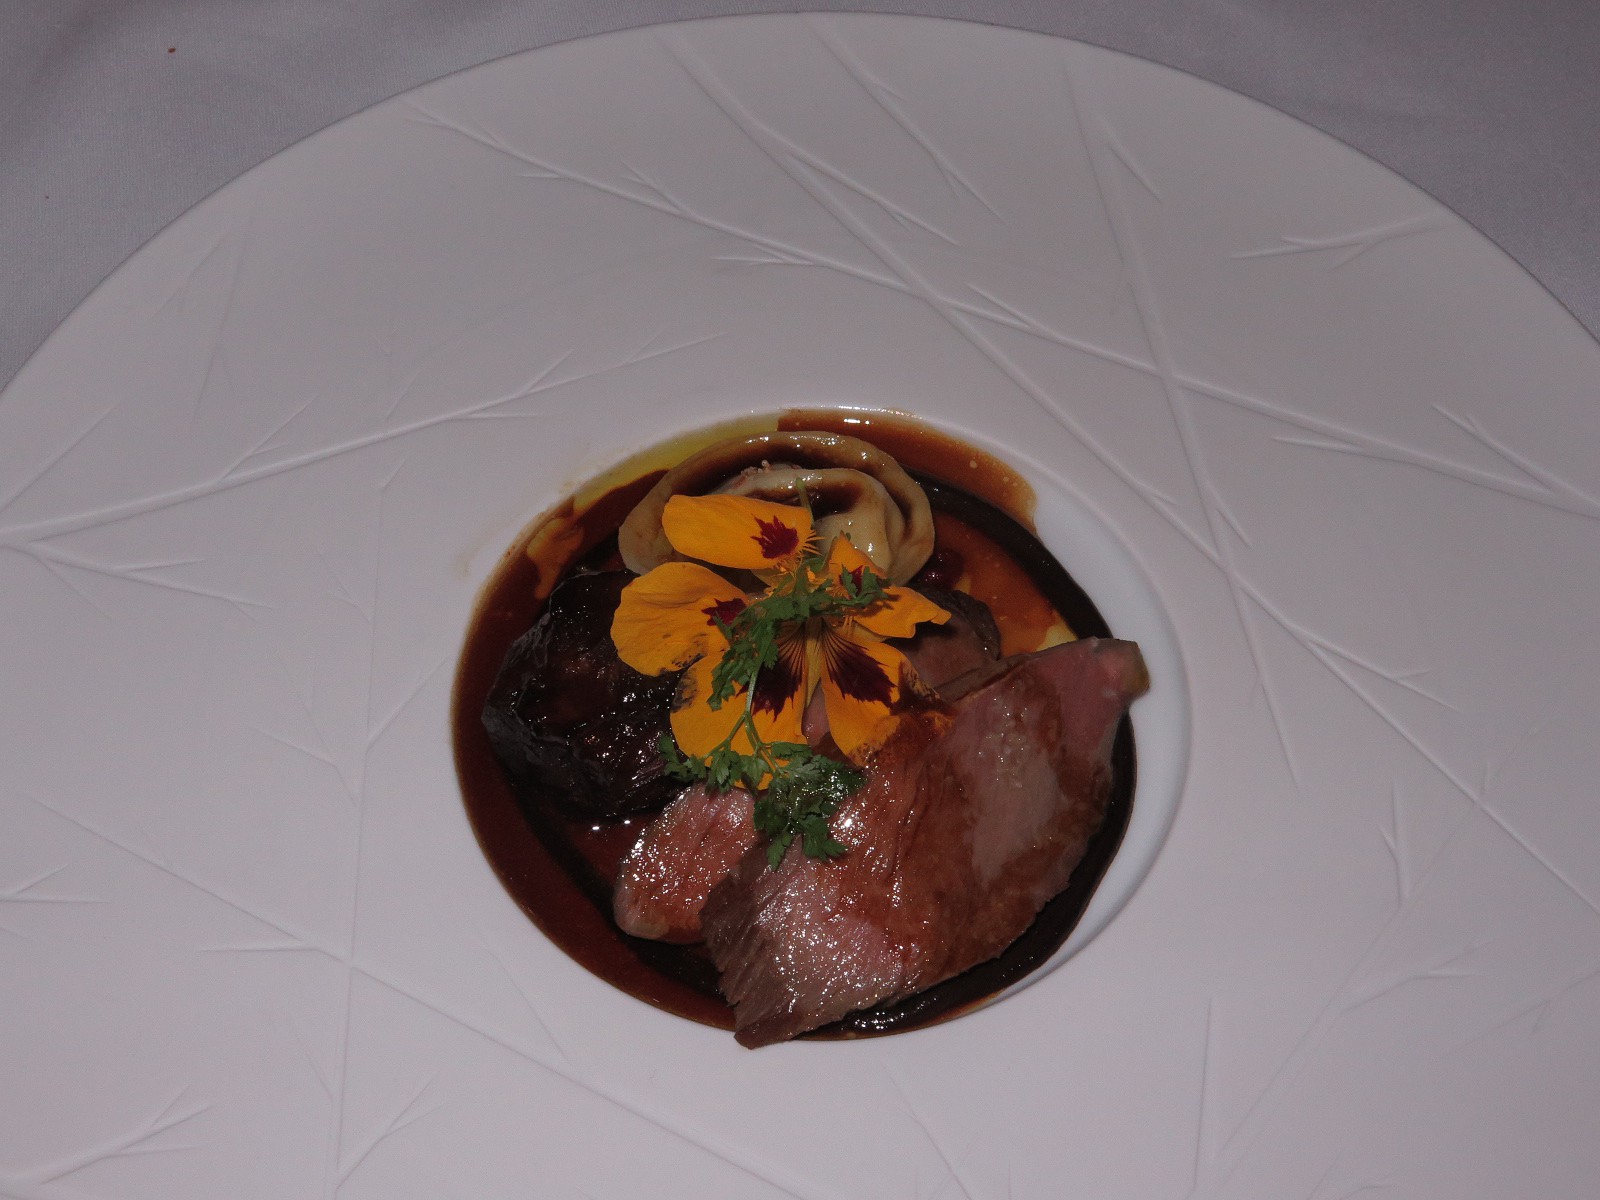 “Slow cooked shoulder & loin of lamb, piperade and goat's cheese ravioli”